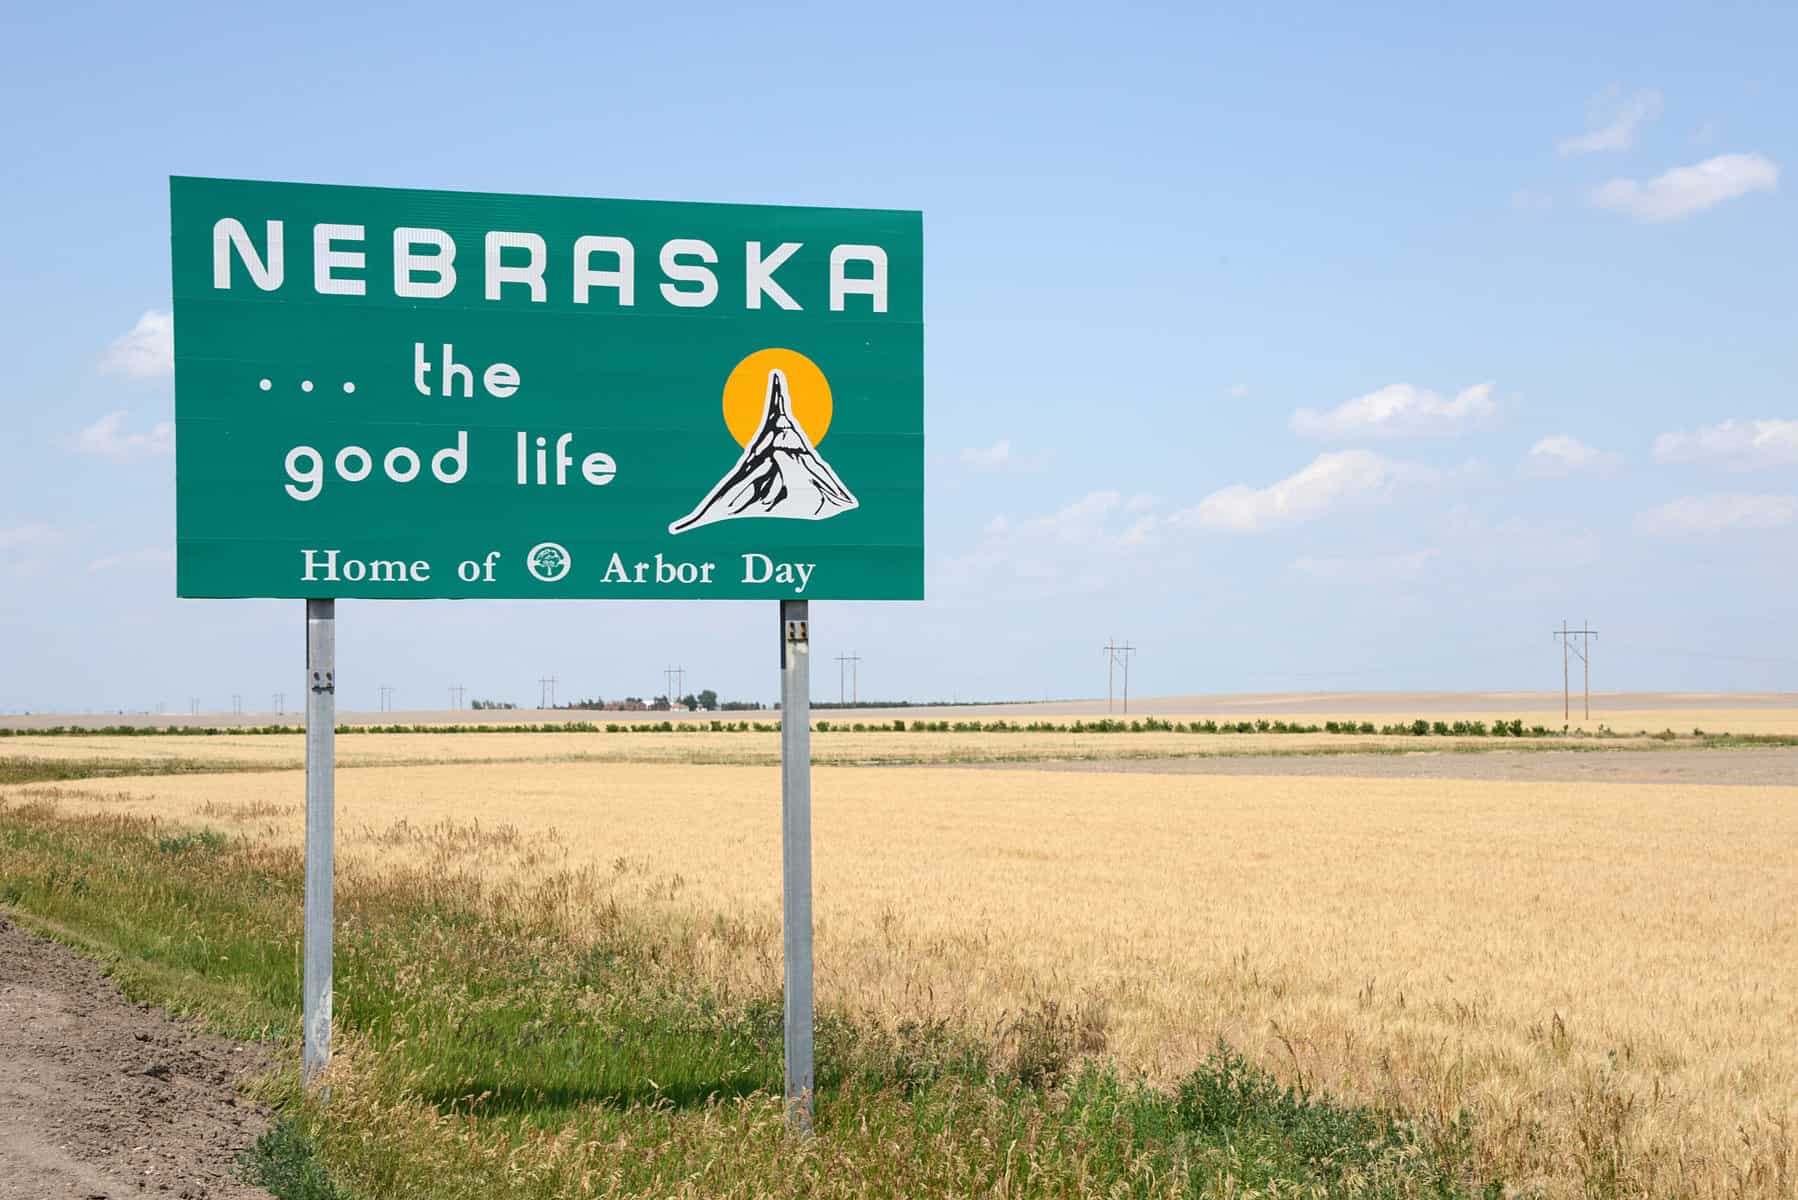 Road sign next to a field that says "Nebraska...the good life"